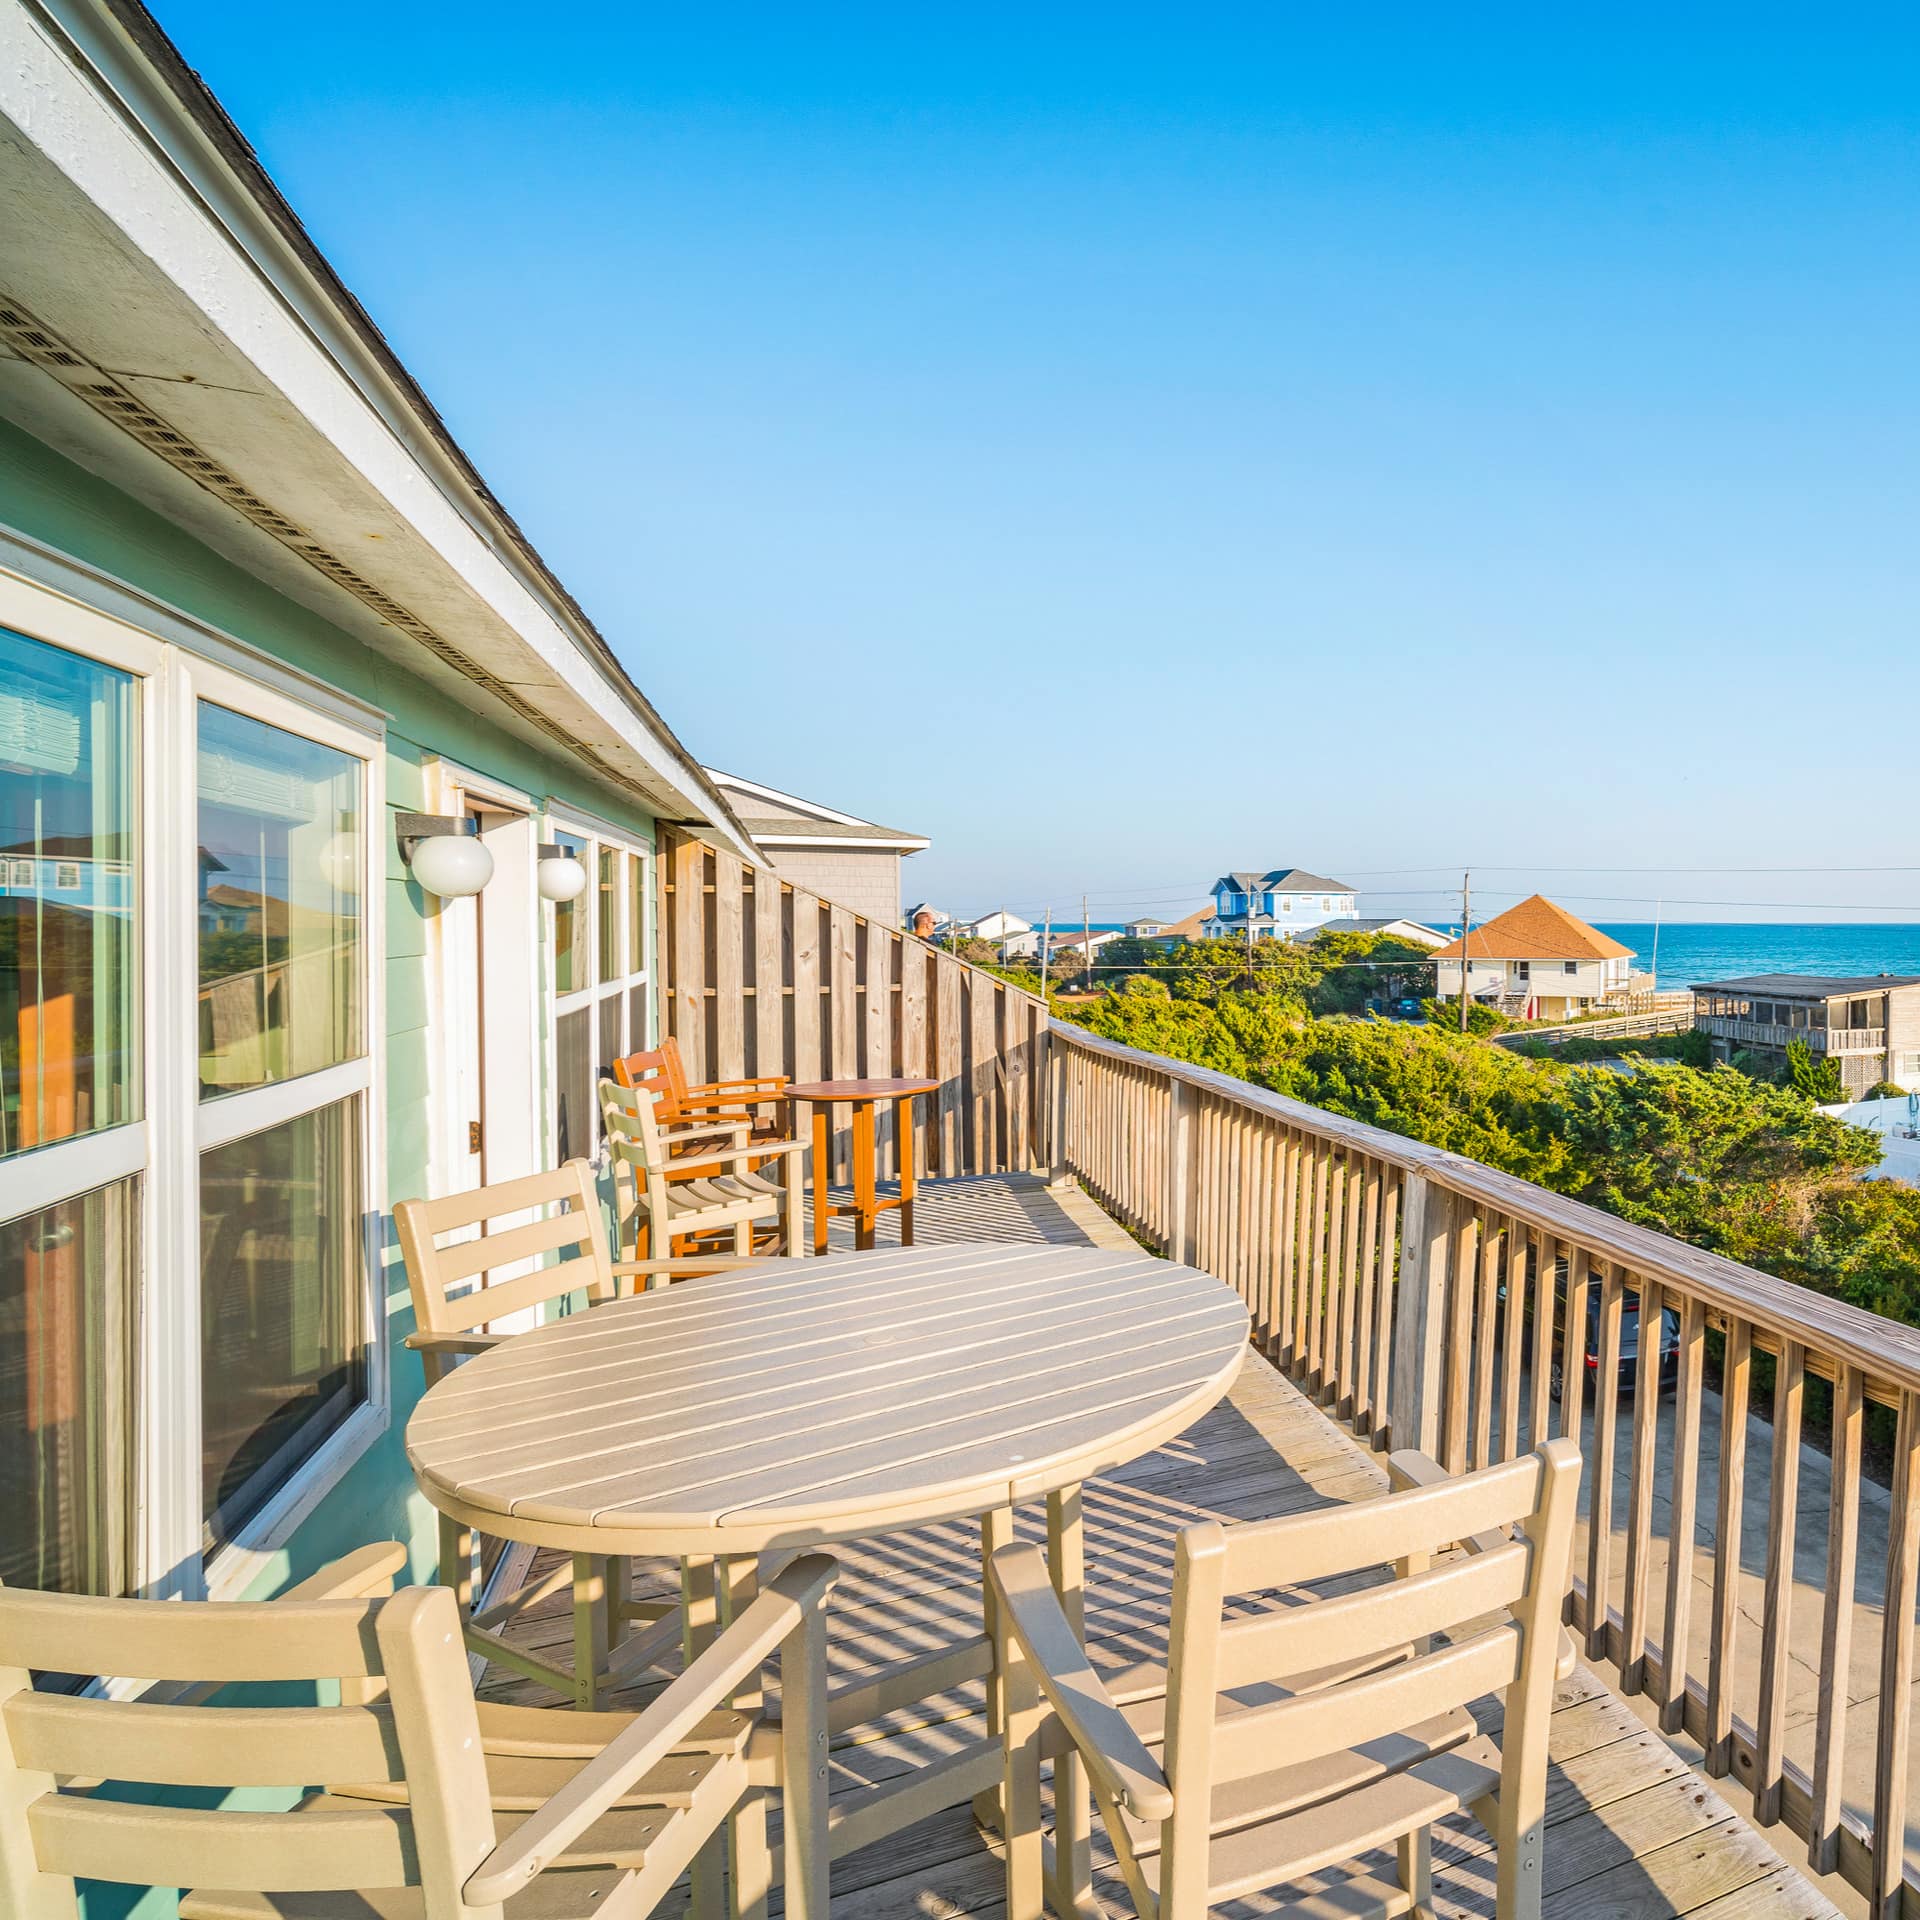 A sunny terrace has seating on it by the ocean in Emerald Isle